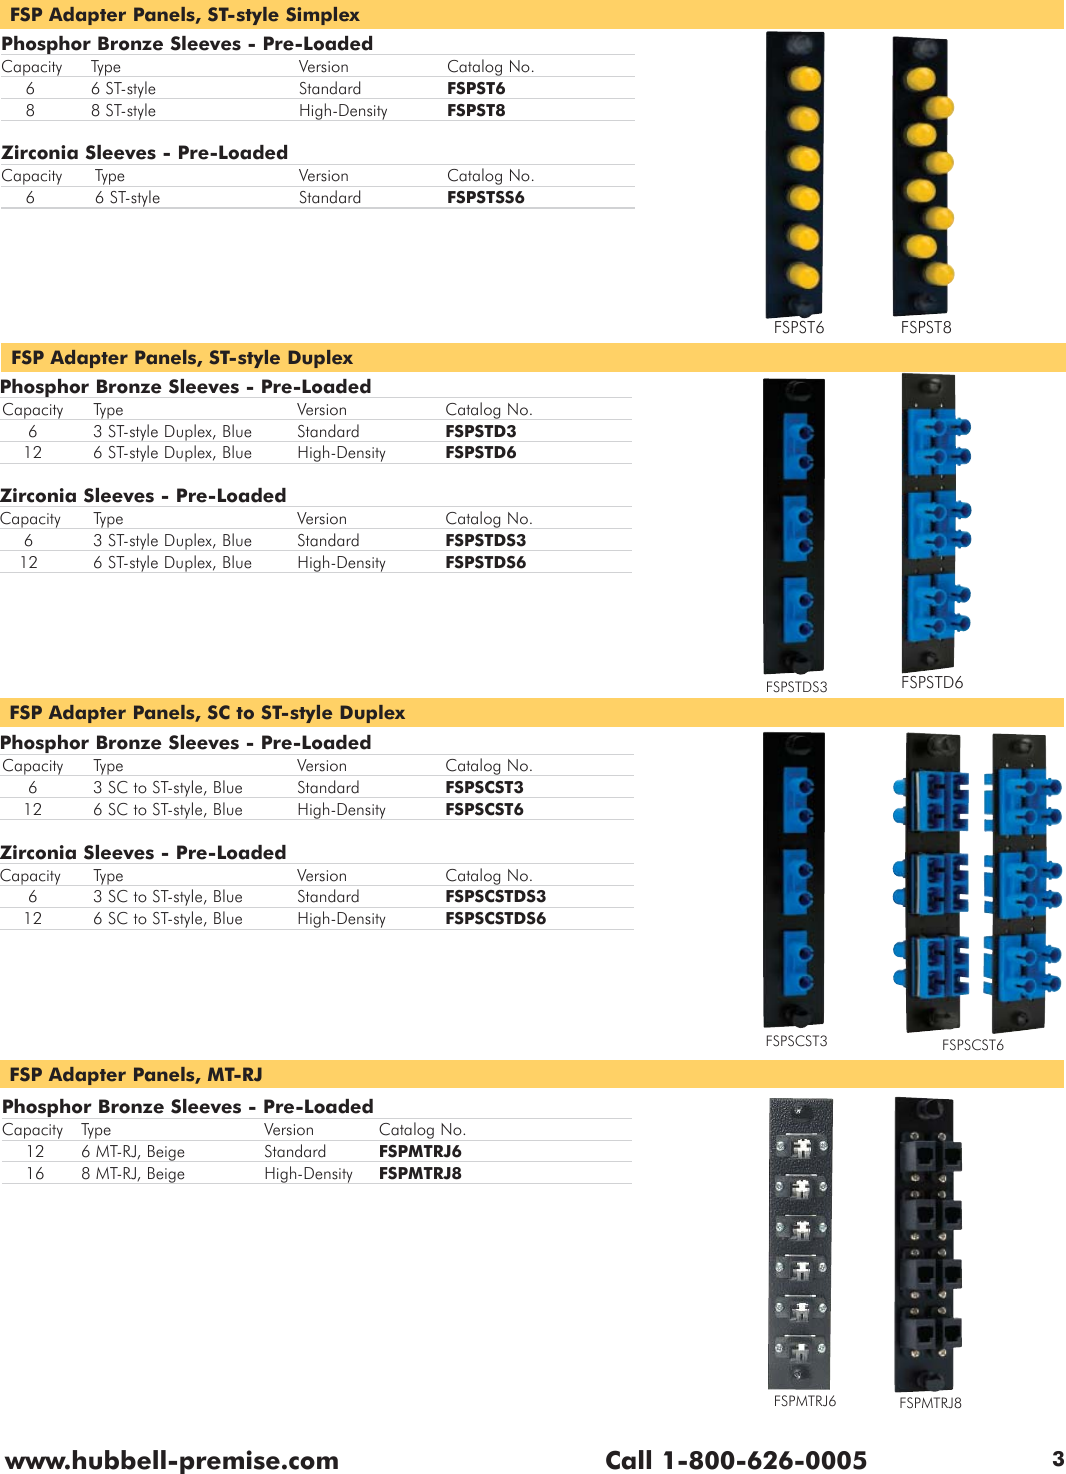 Page 4 of 4 - FSP_Adapters